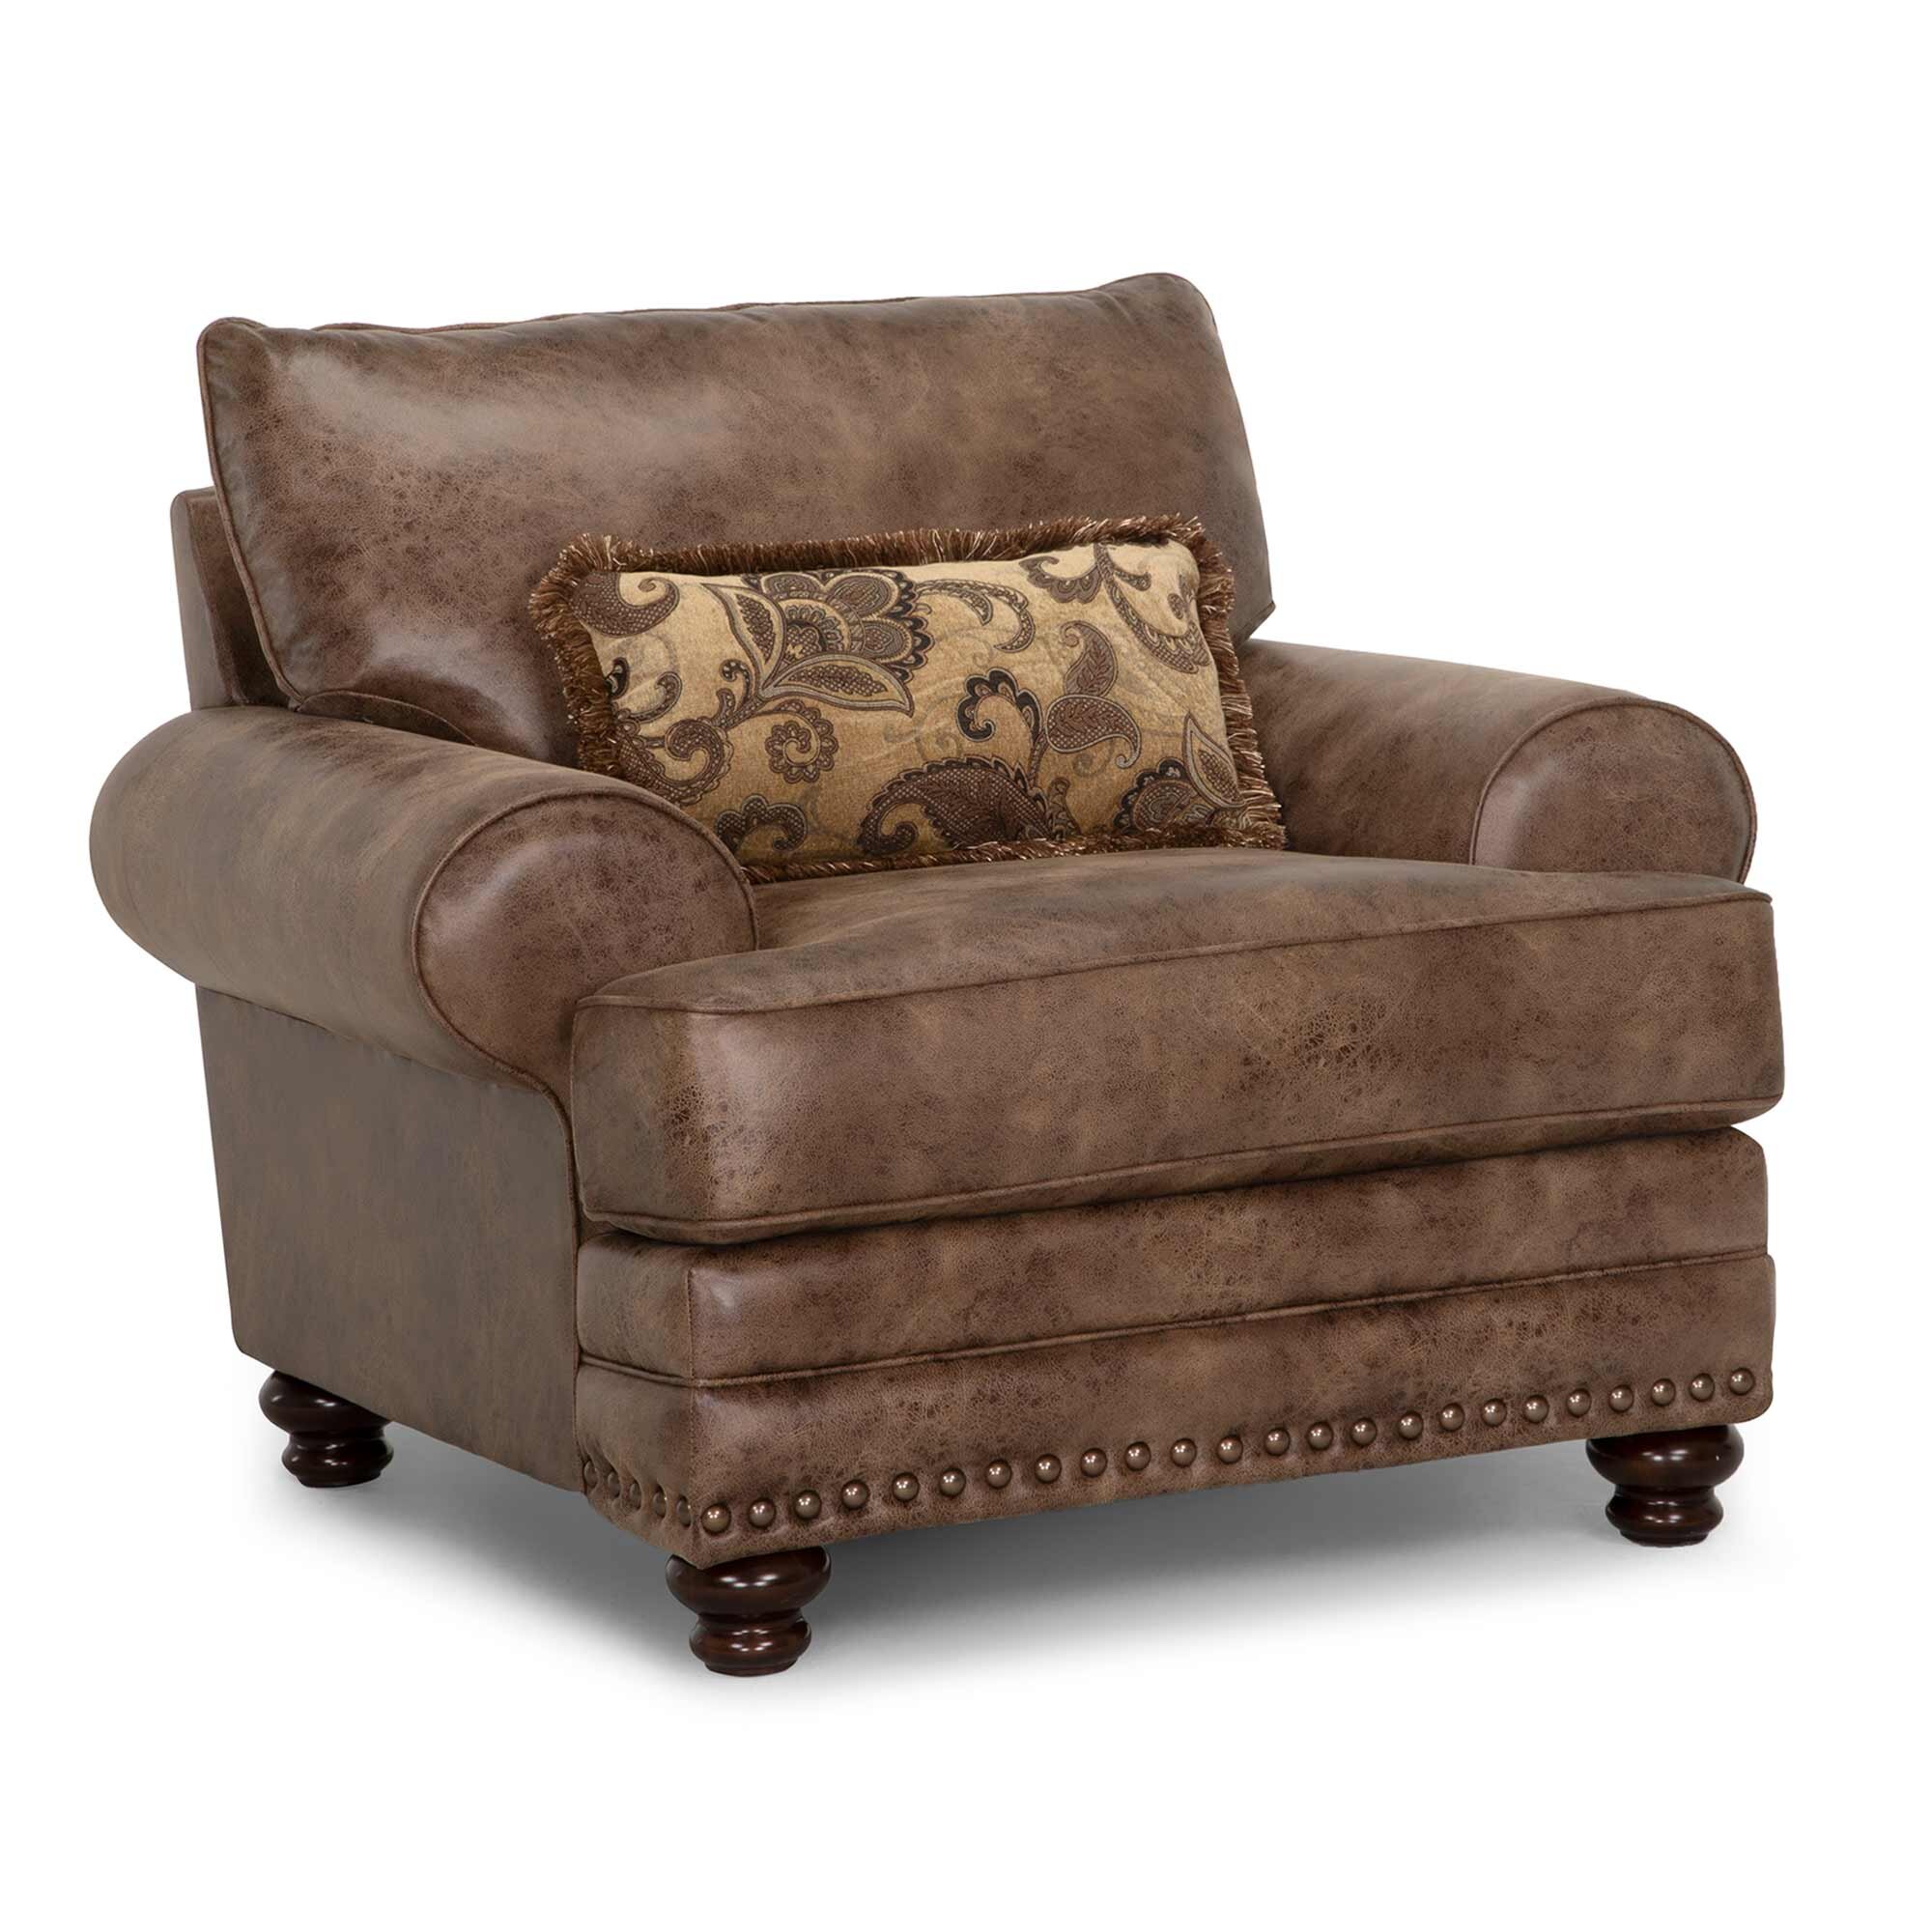 Claremore 48” Wide Club Chair